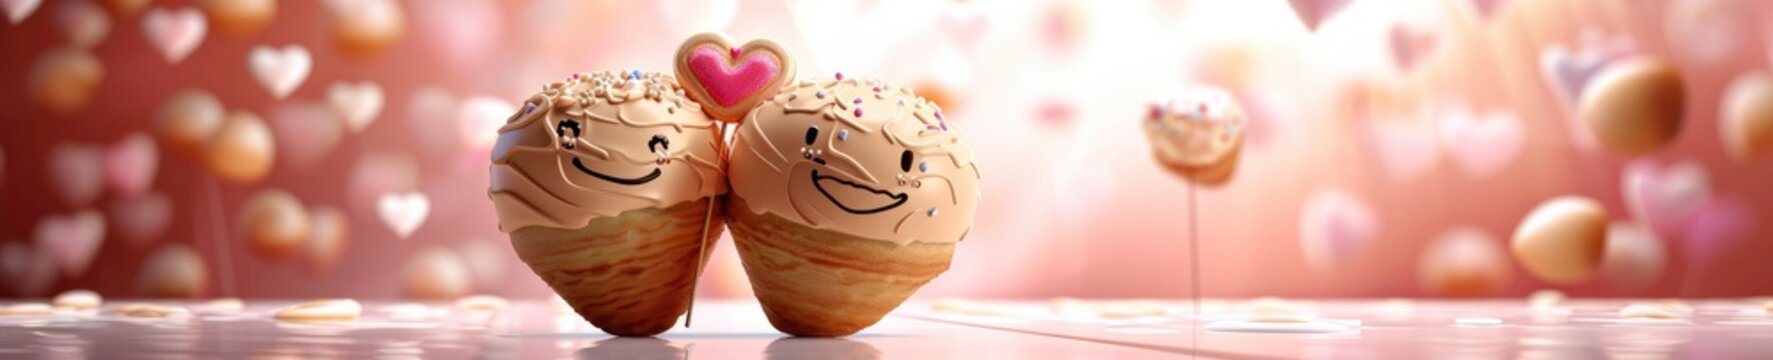 Cute image of the  cookie characters full of love and happiness